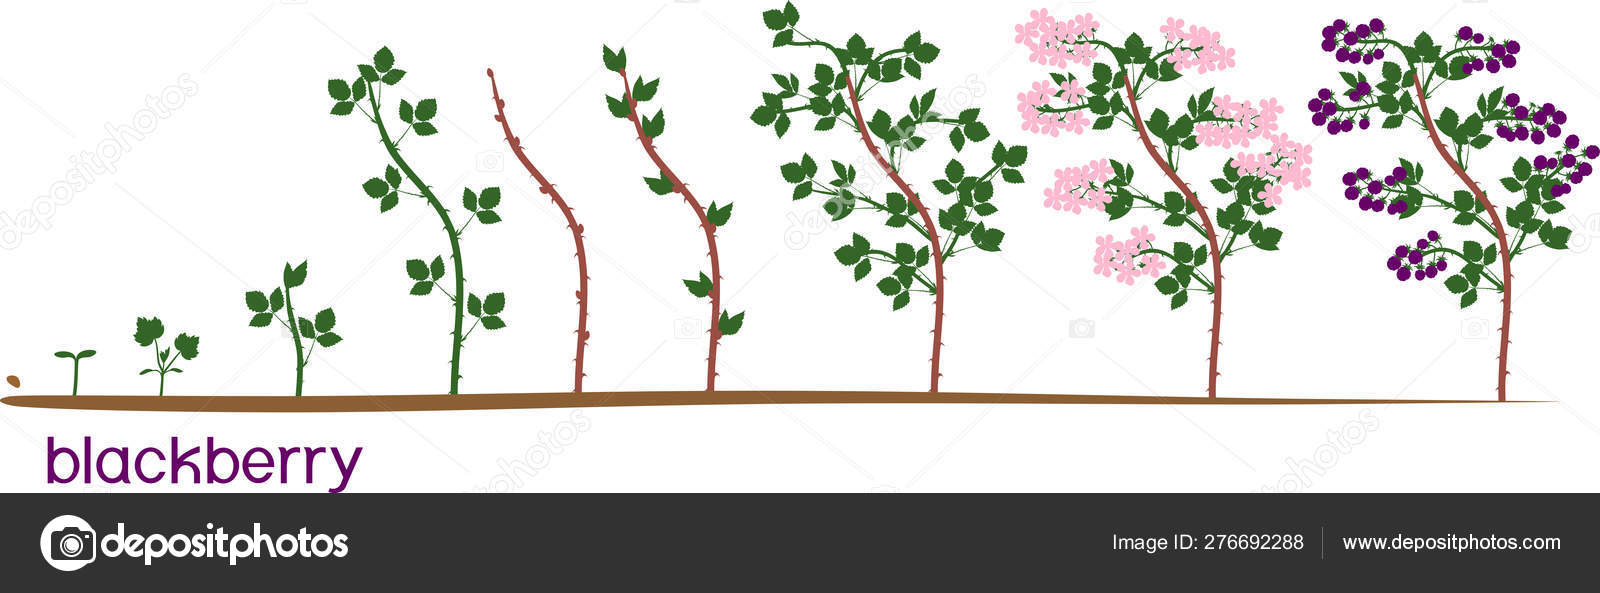 Two Year Life Cycle Blackberry Plant Stock Vector (Royalty, 48% OFF